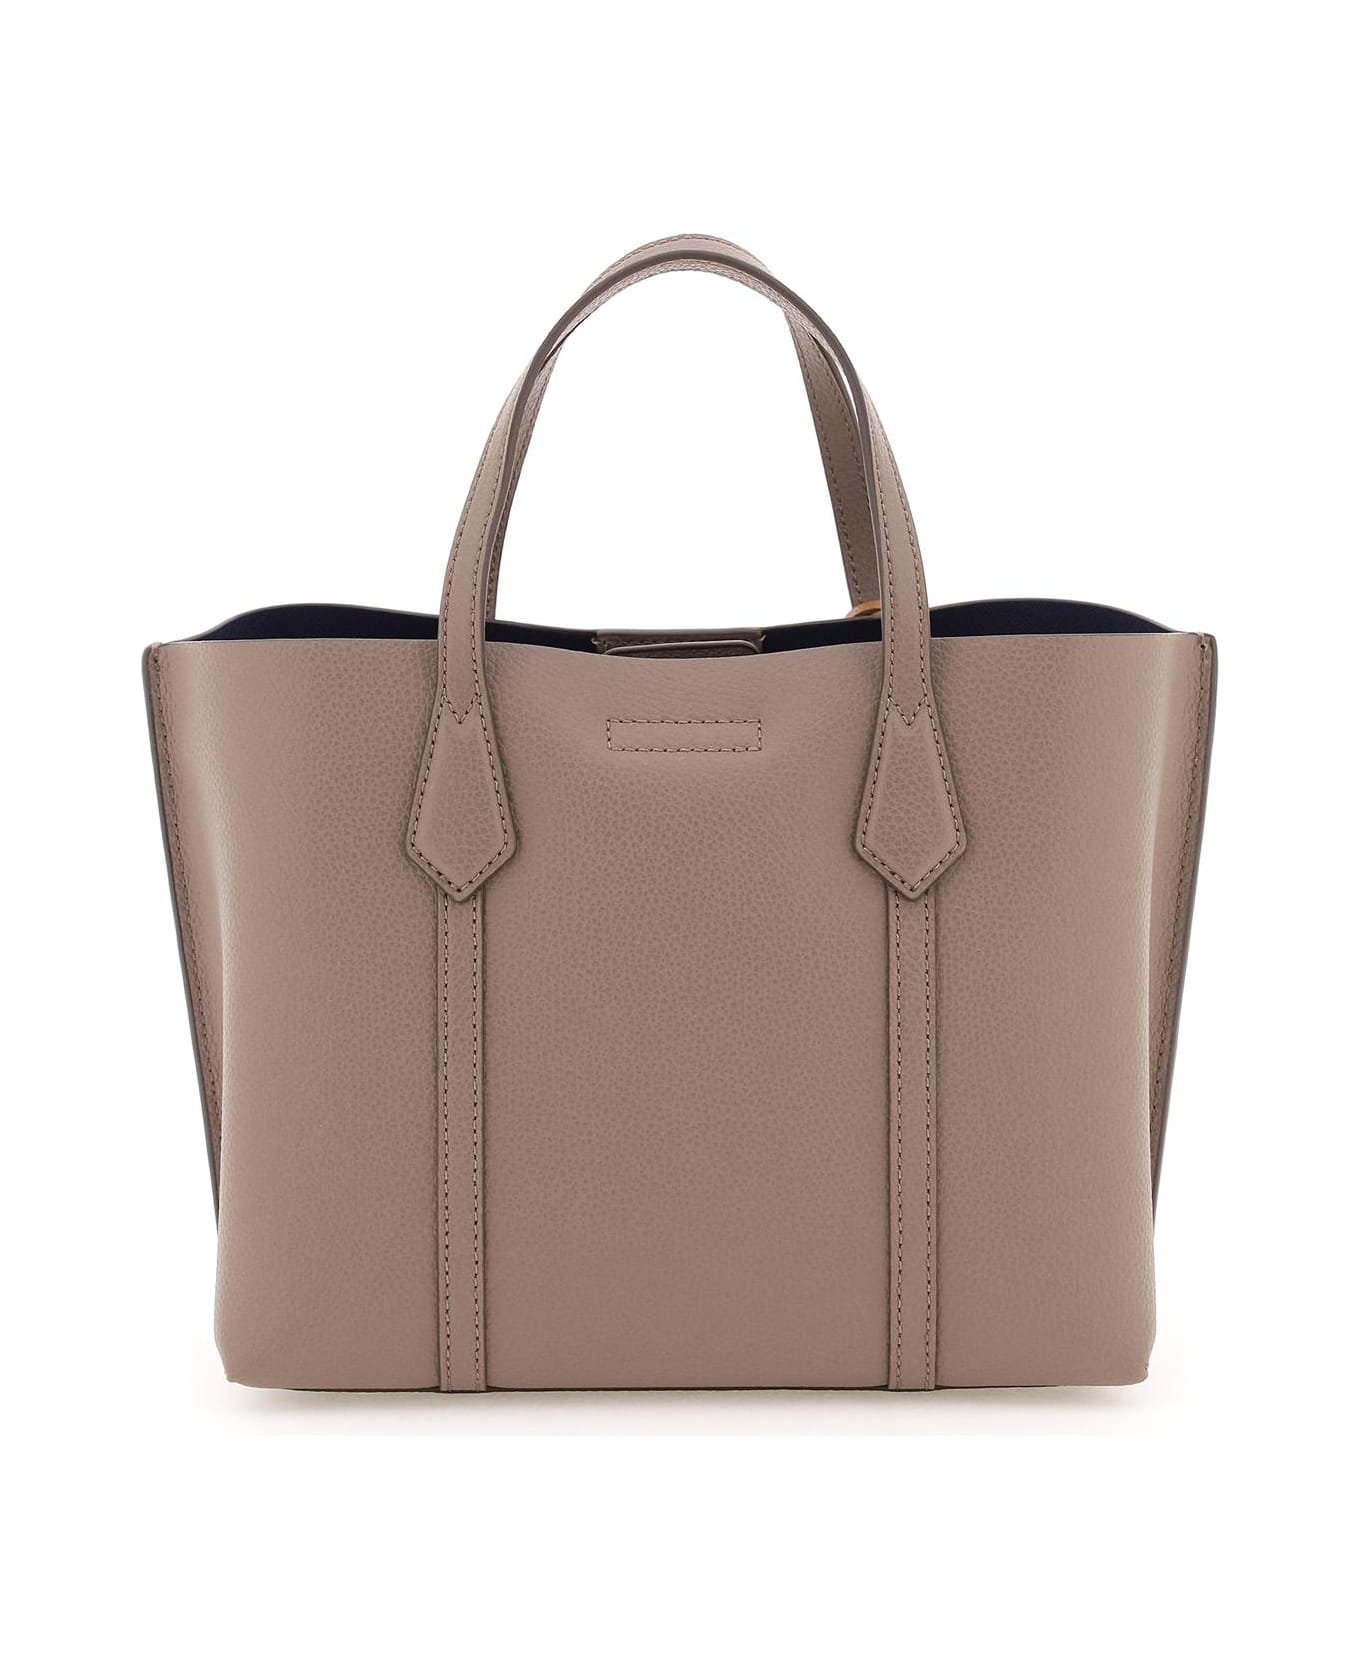 Tory Burch Perry Shopping Bag - Grey トートバッグ